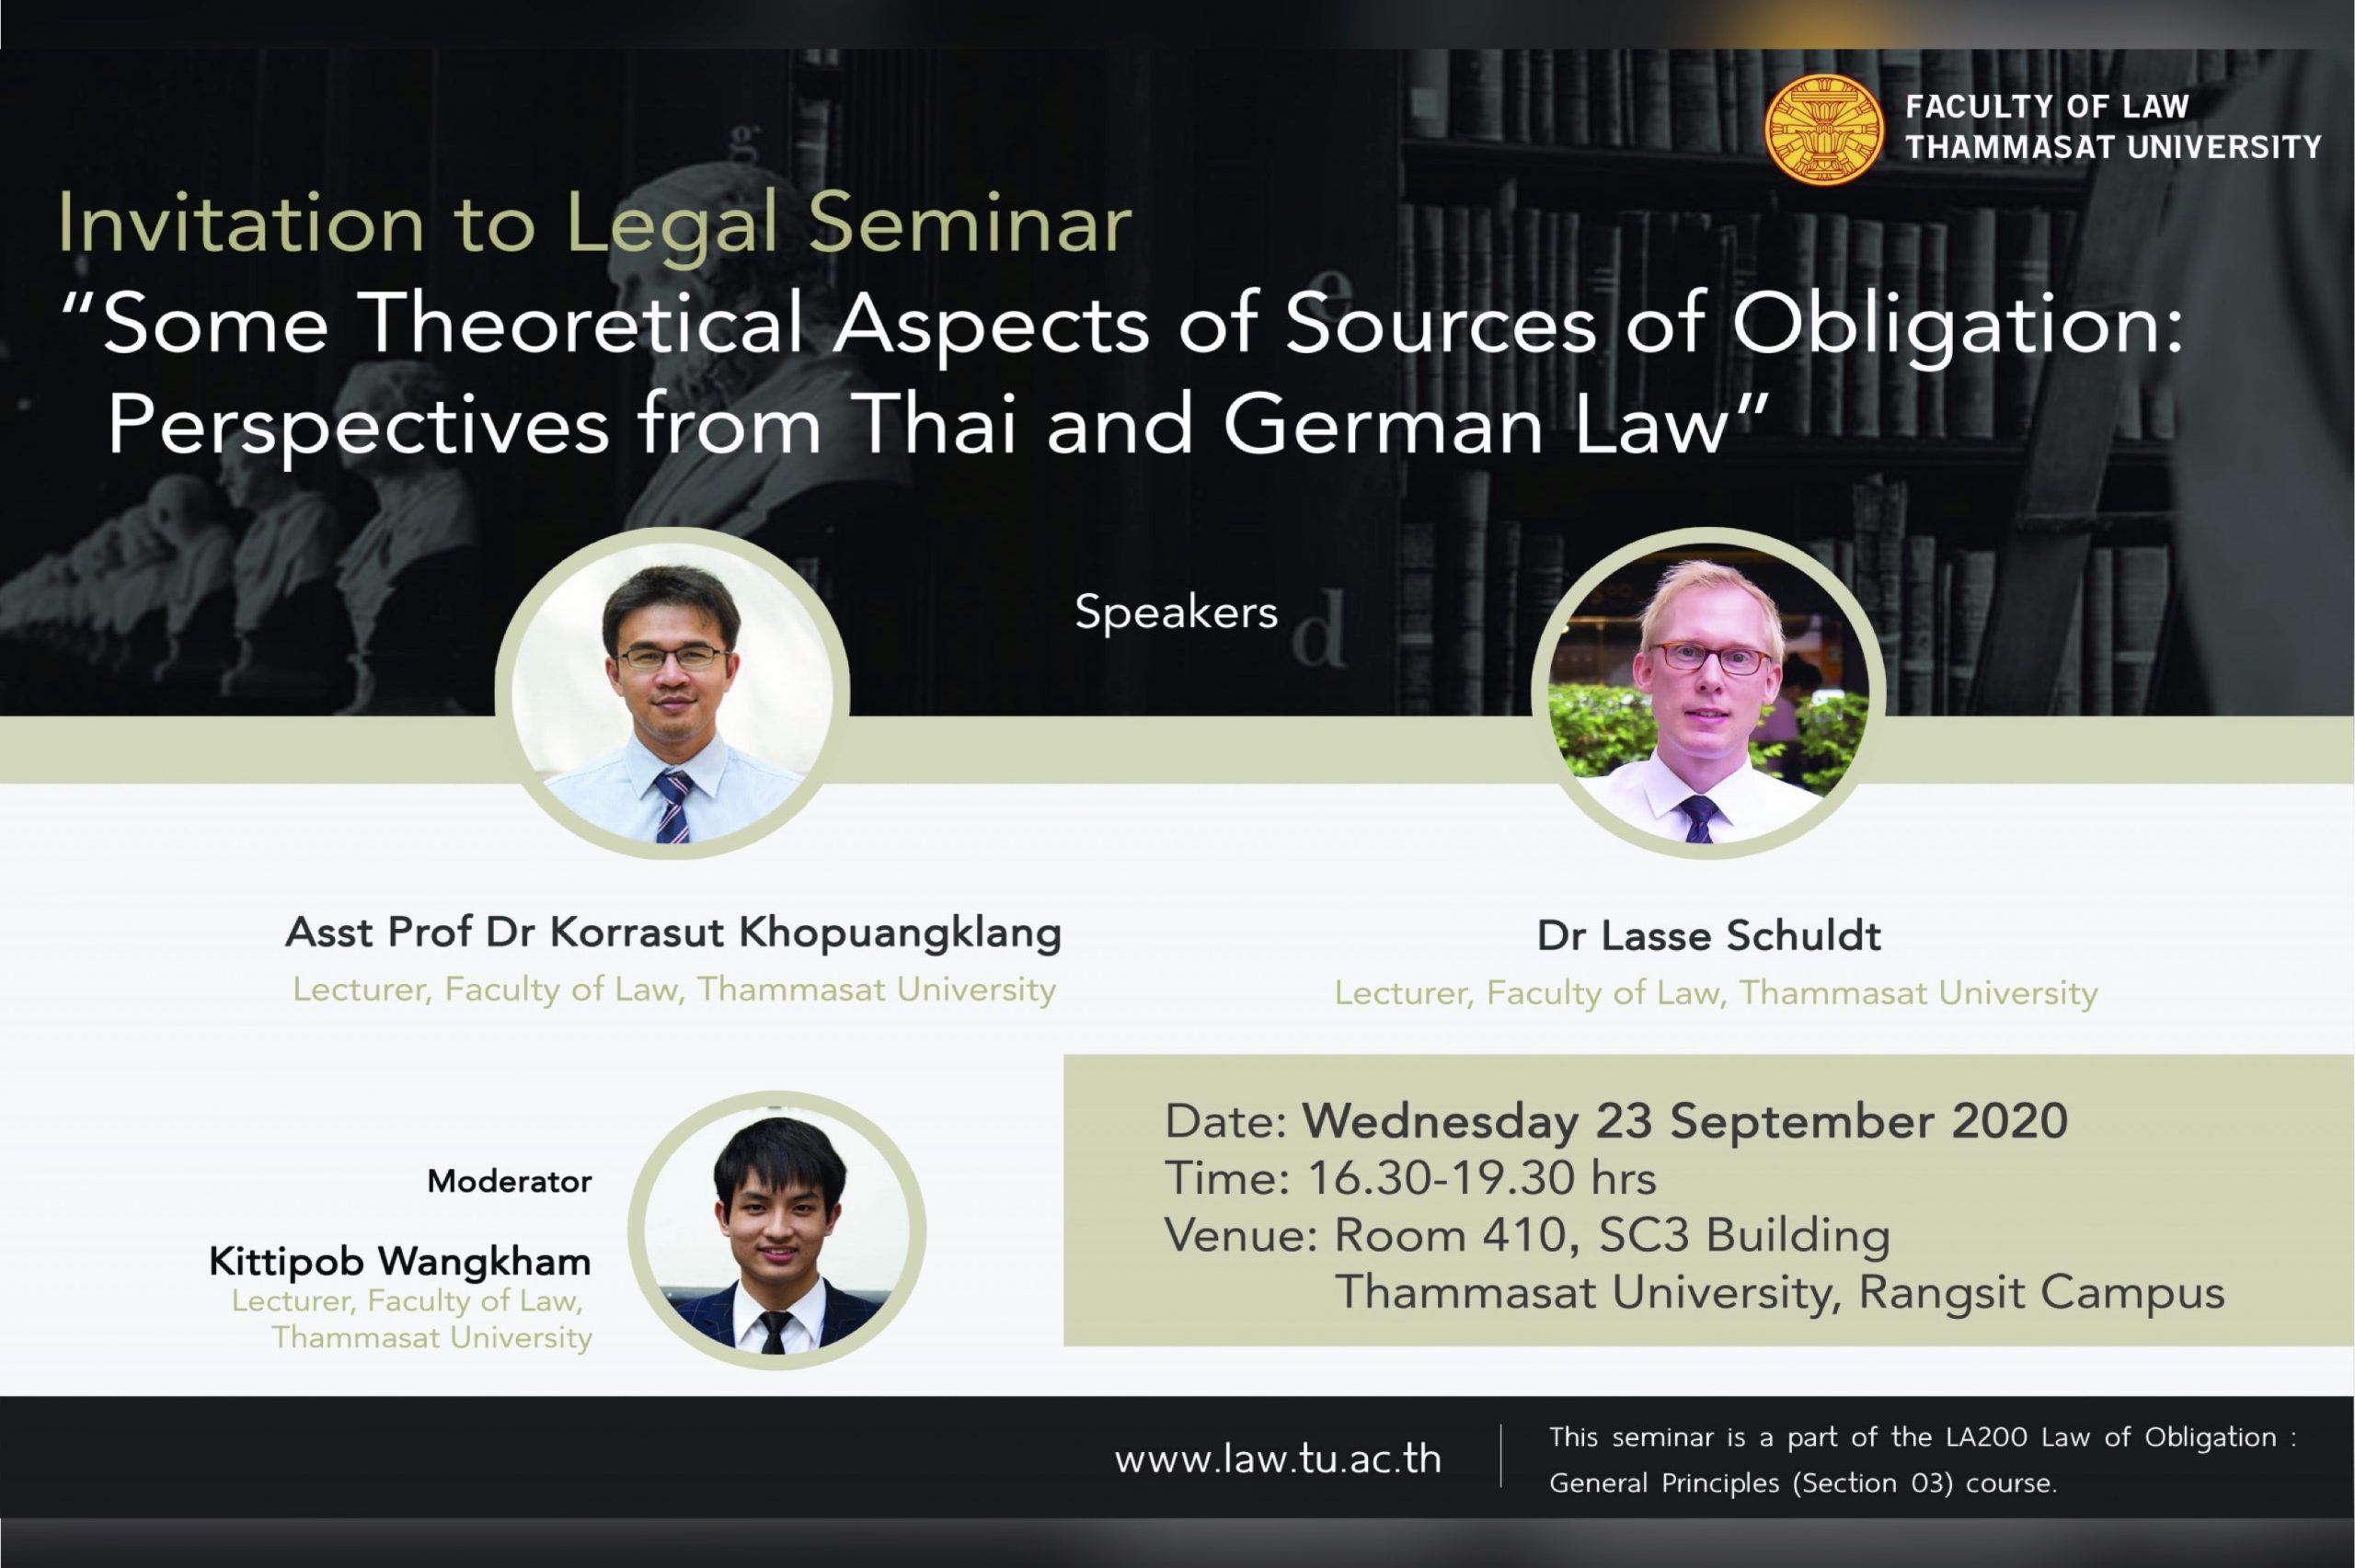 Summary of legal seminar on “Some Theoretical Aspects of Sources of Obligation: Perspectives from Thai and German Law”